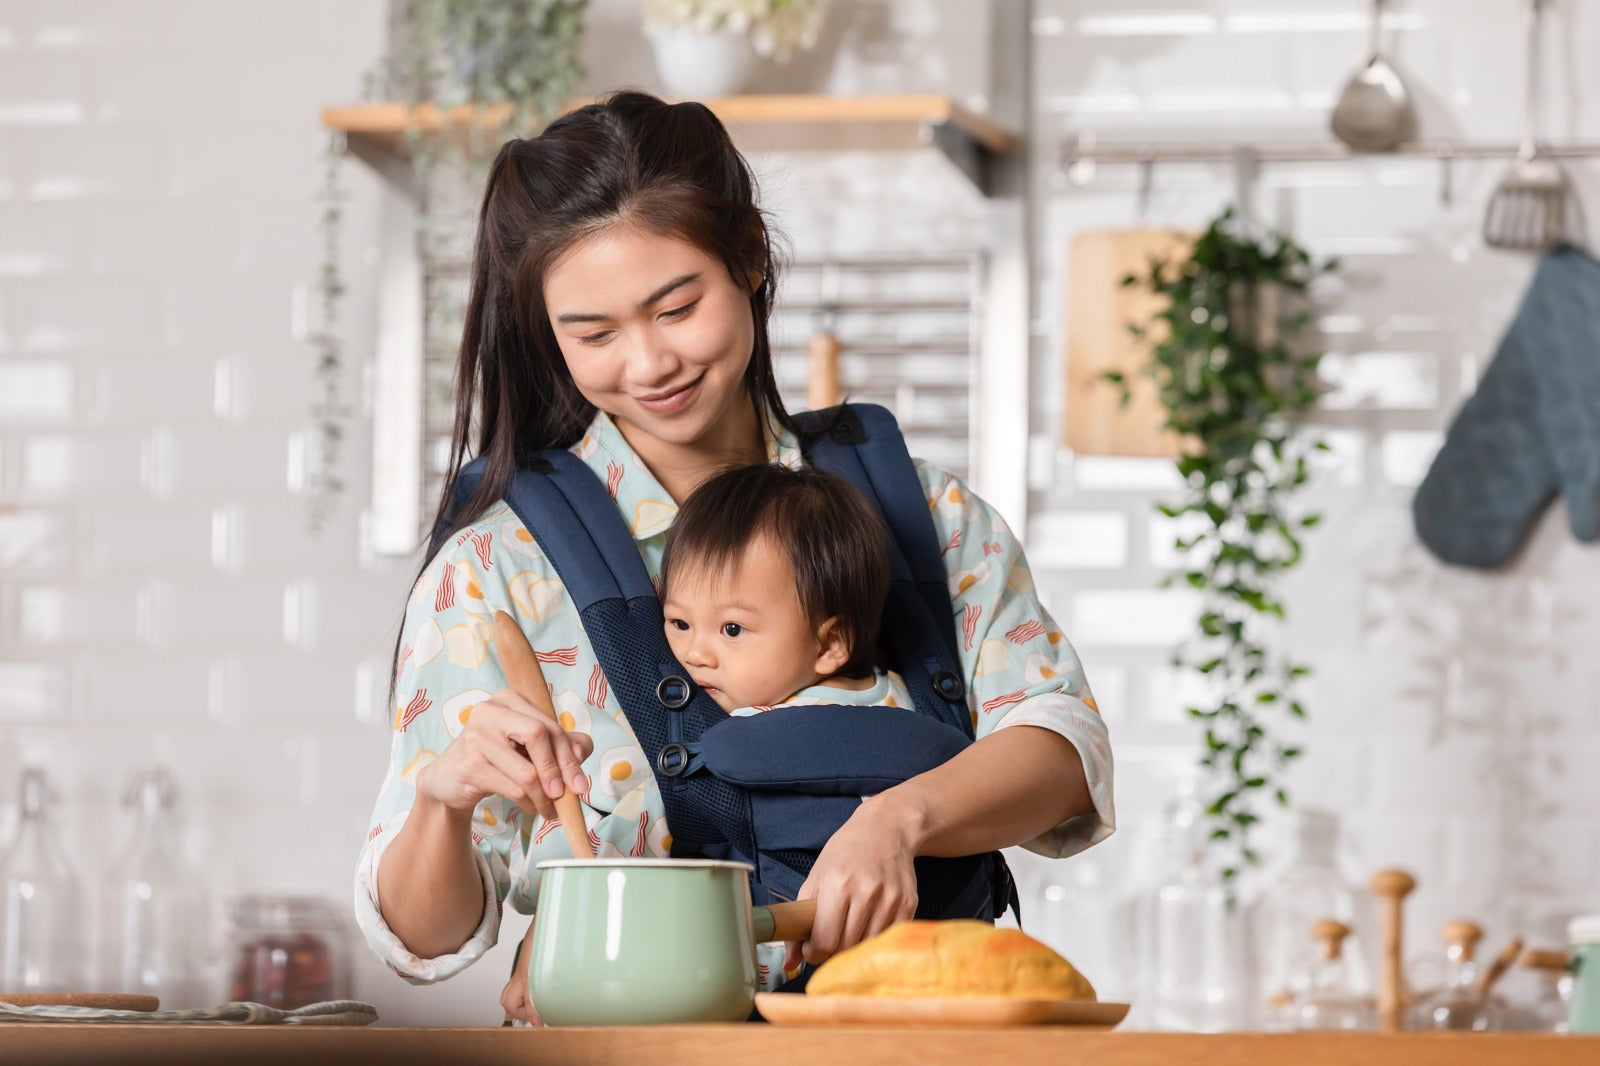 Asian Woman Carrying Baby Cooking Housewife Young Mother Daughter Home Kitchen 123Rf